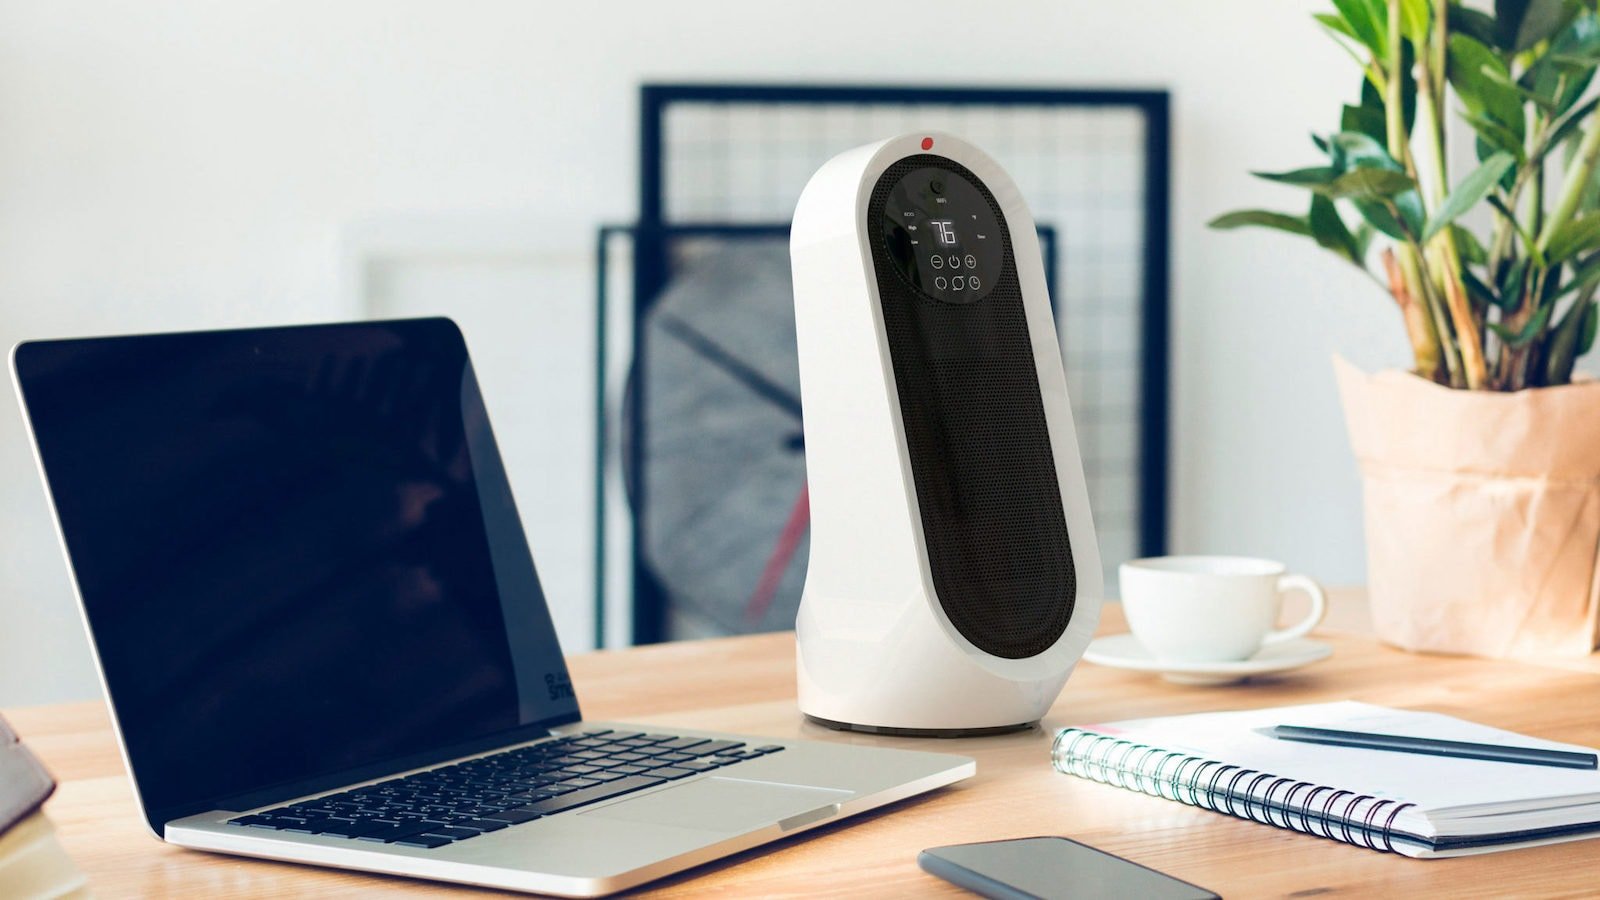 Atomi Tabletop Smart Heater offers seamless wireless control via Wi-Fi connectivity